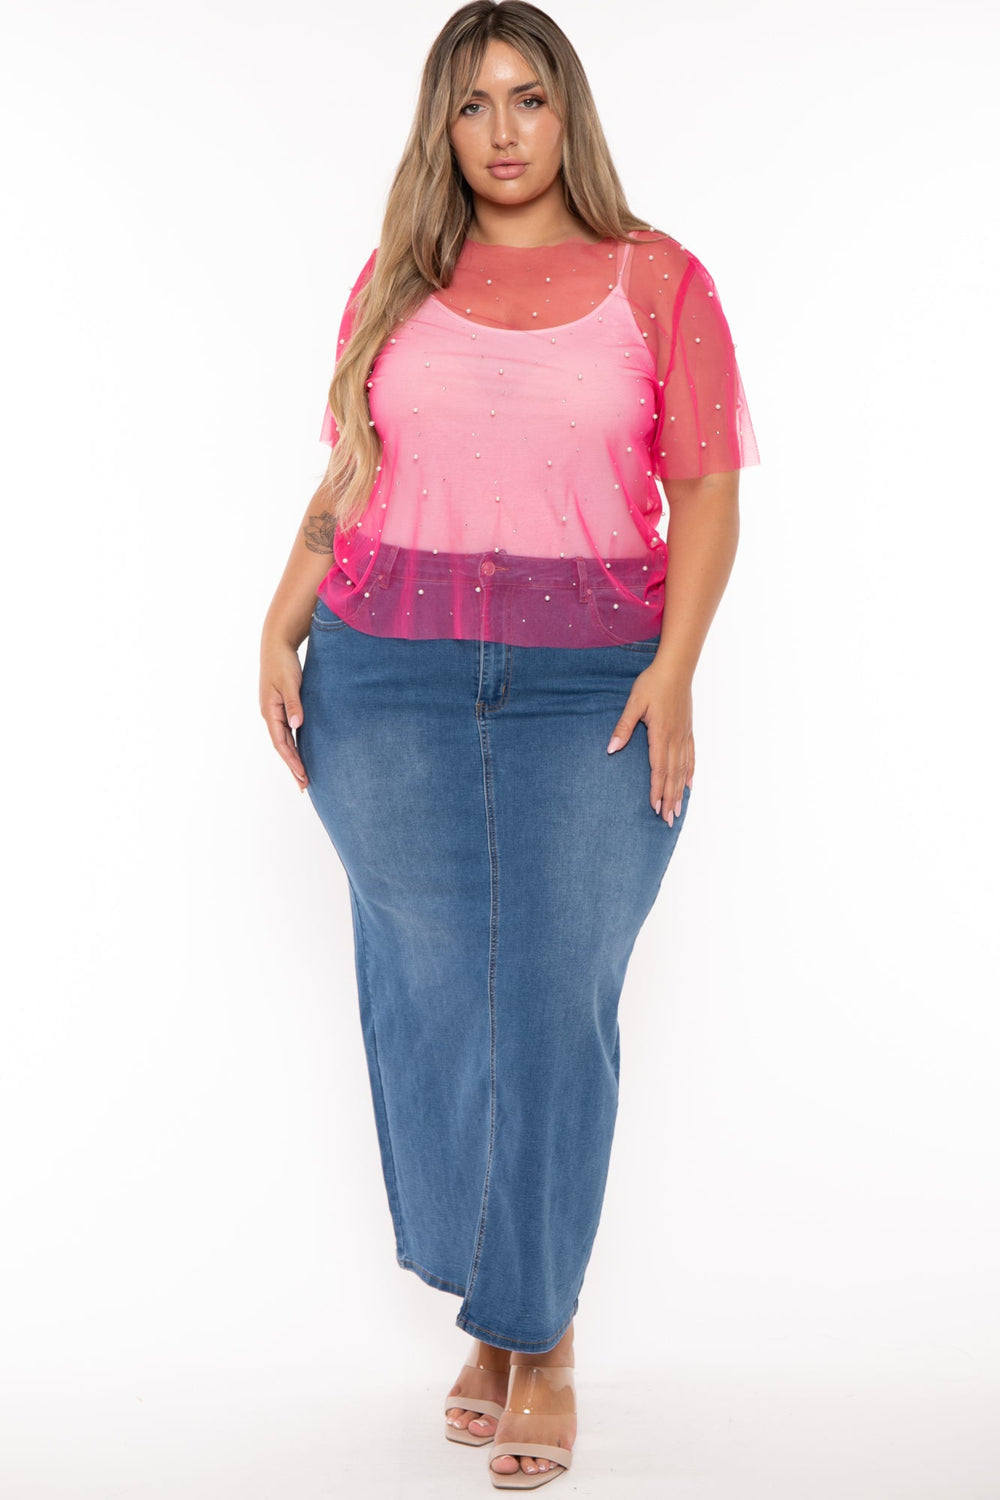 GEE GEE Tops Plus Size Sprinkle of Pearls SS  Top  - Hot Pink